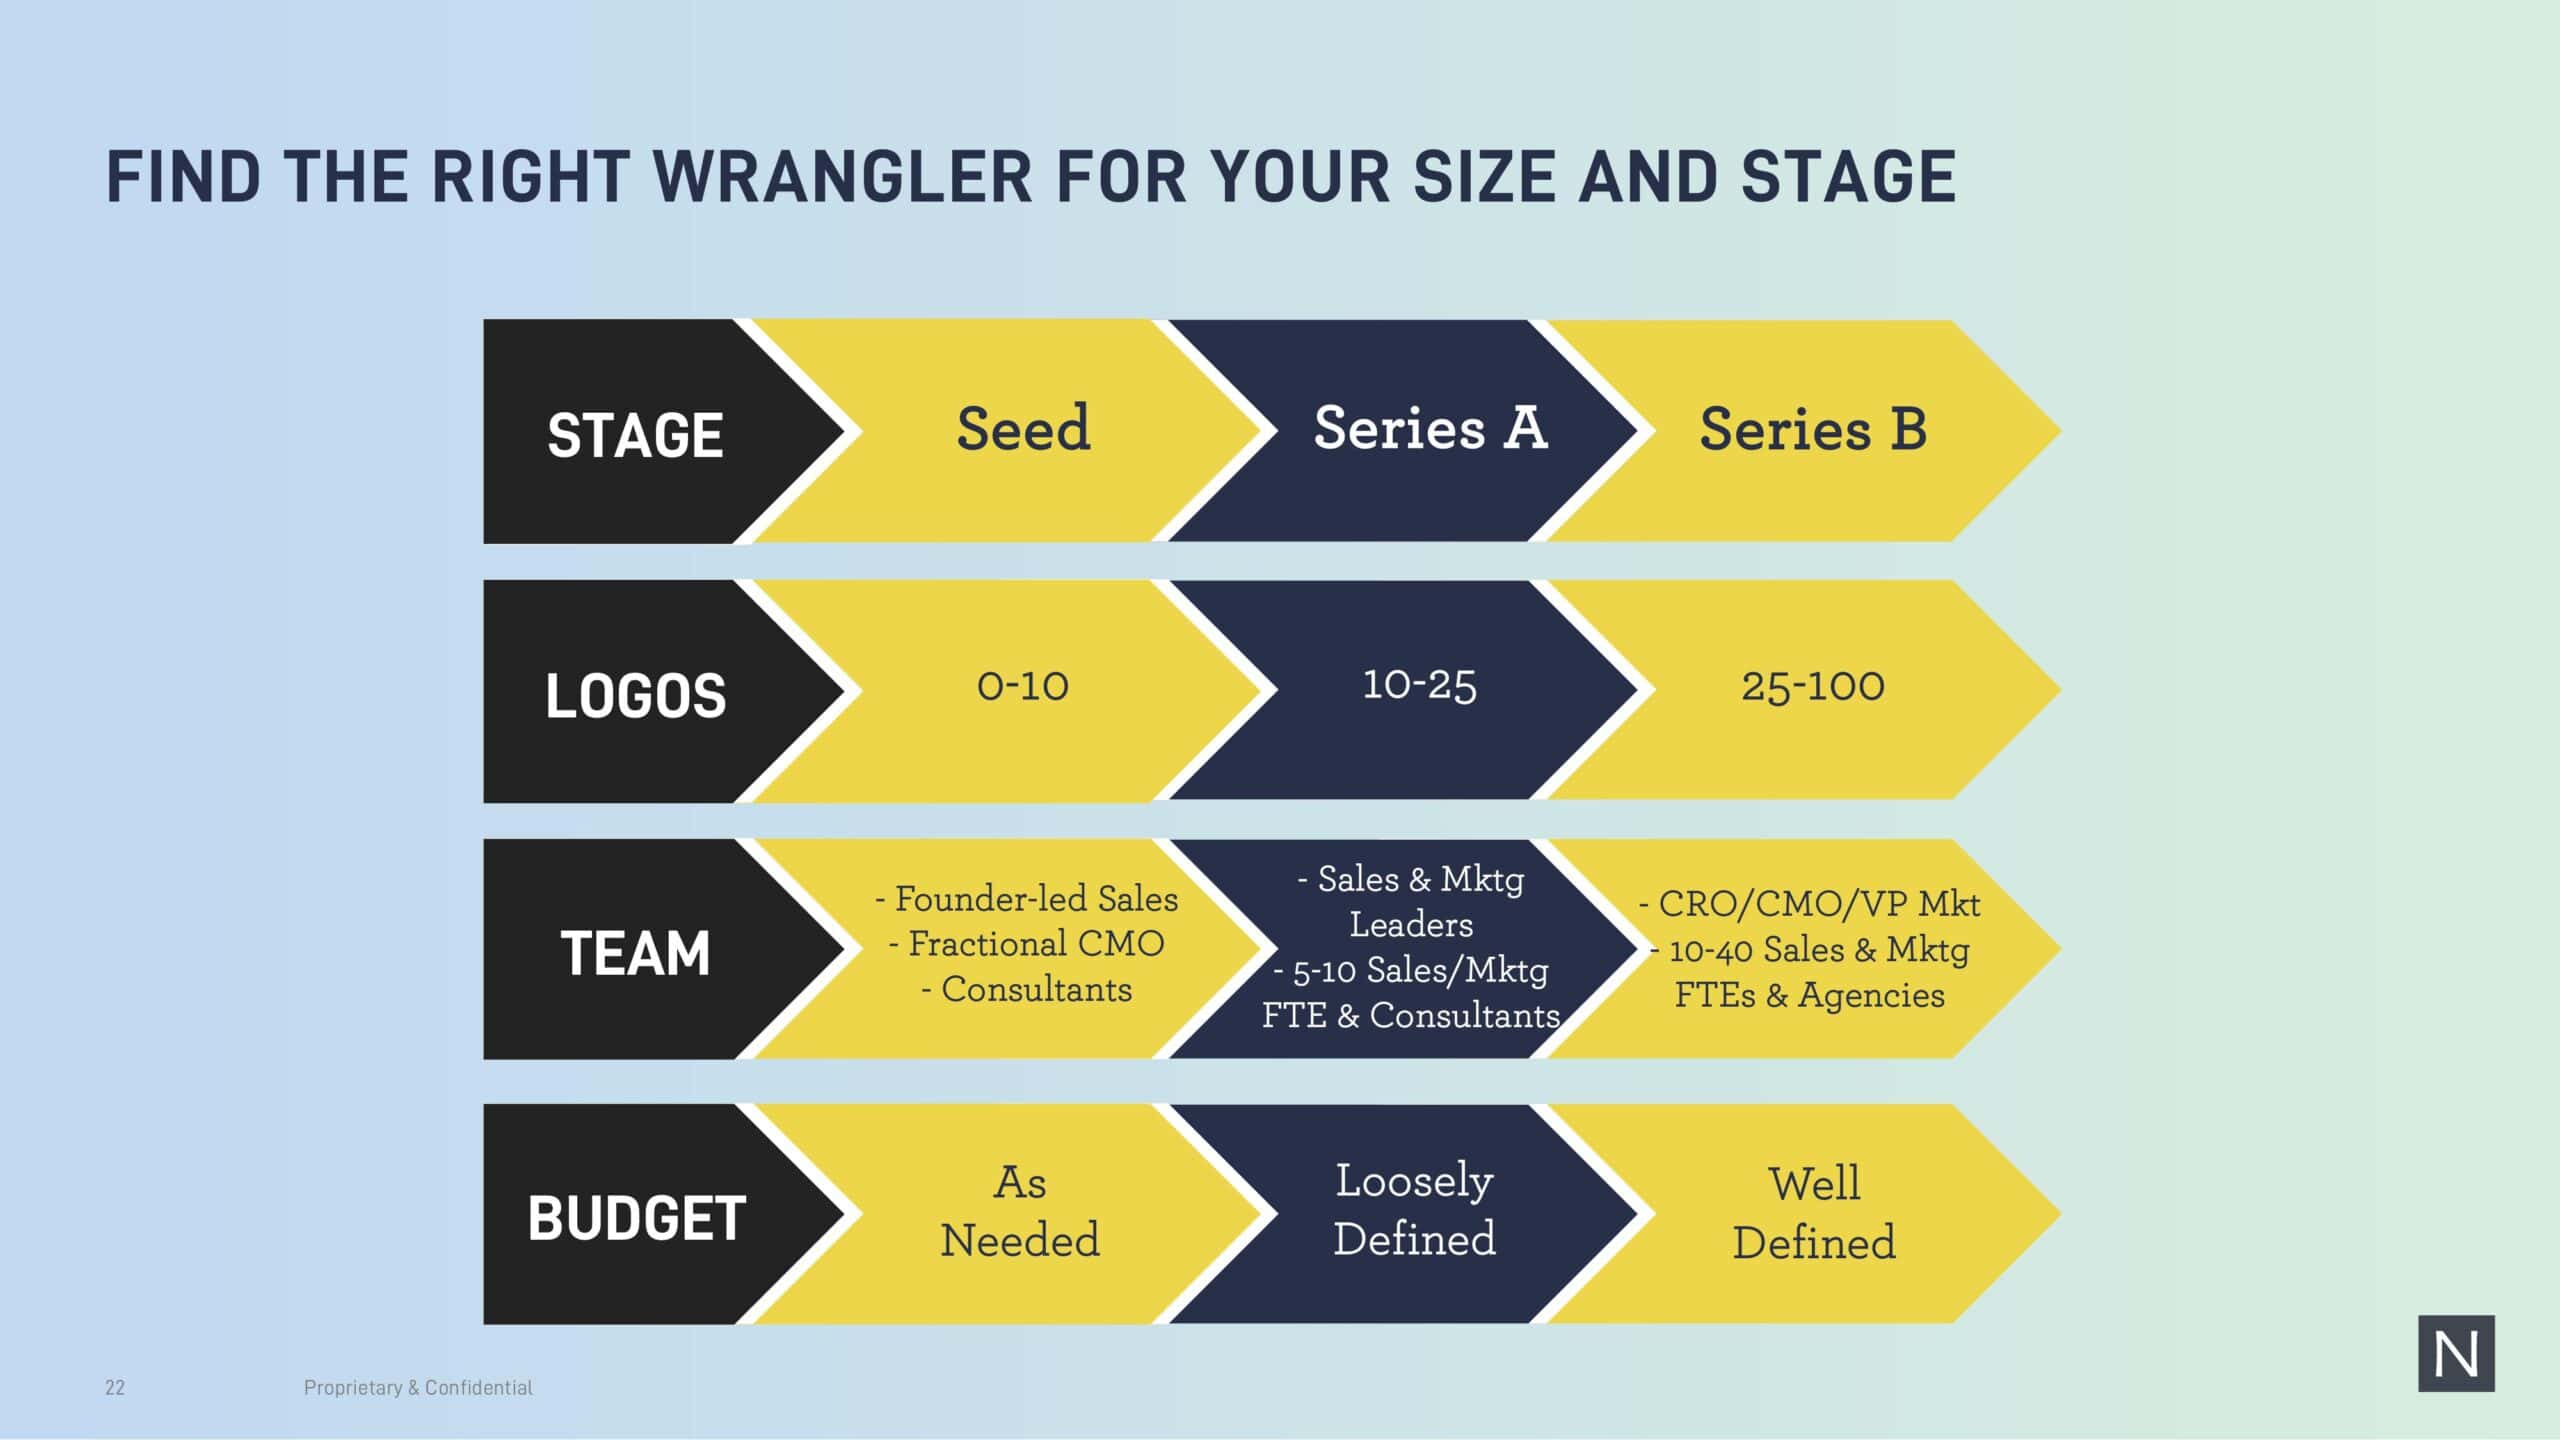 Framework for how to approach team building and marketing budget from Seed to Series A to Series B